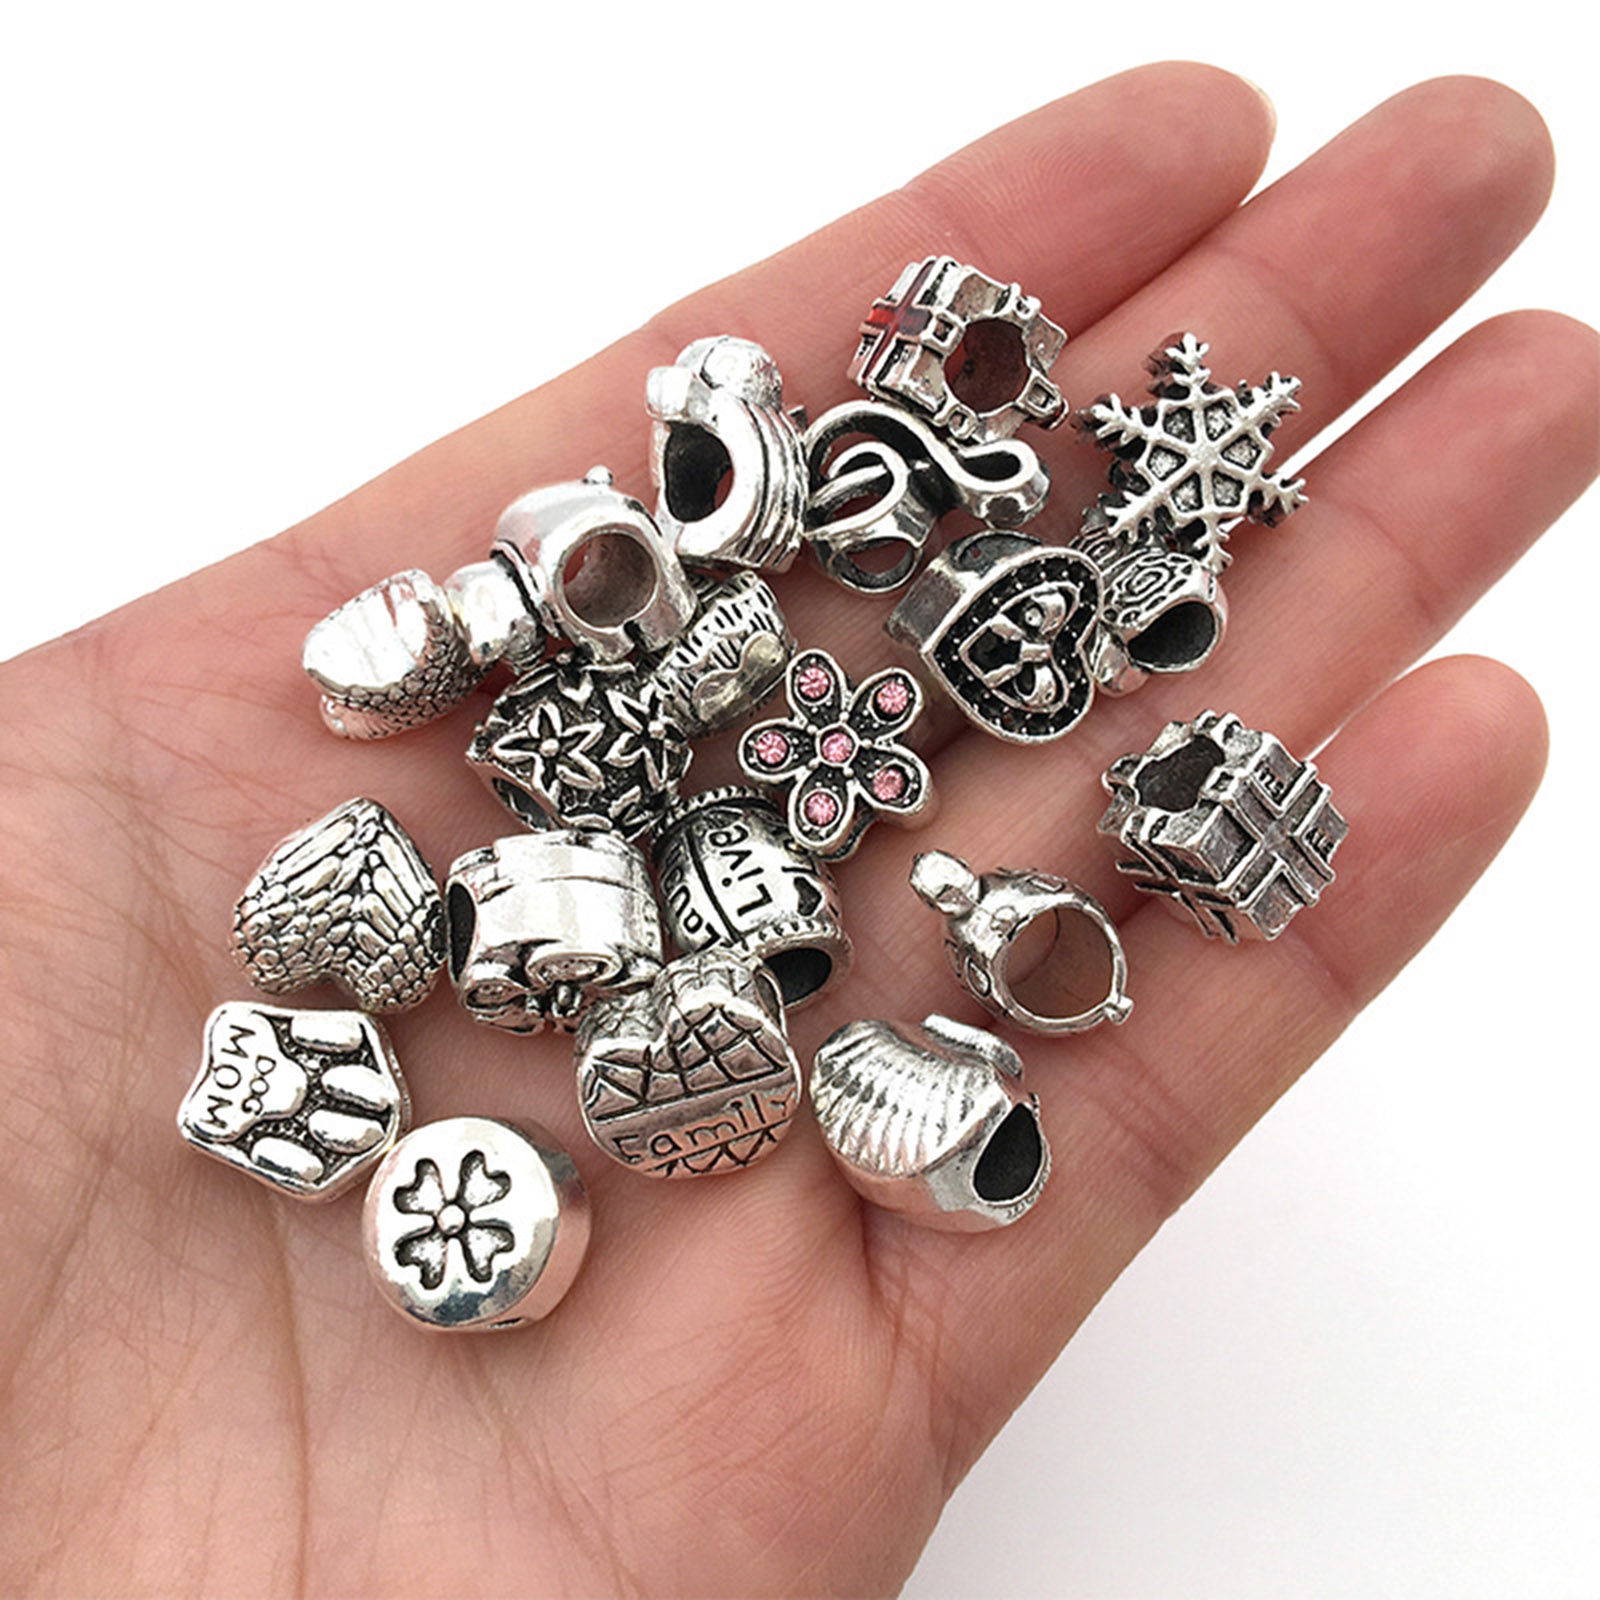 Picture of Zinc Based Alloy Children Kids Beads DIY Kits For Bracelet Necklace Jewelry Making Handmade Accessories Antique Silver Color Pink 9.8cm x 9.8cm, 1 Set